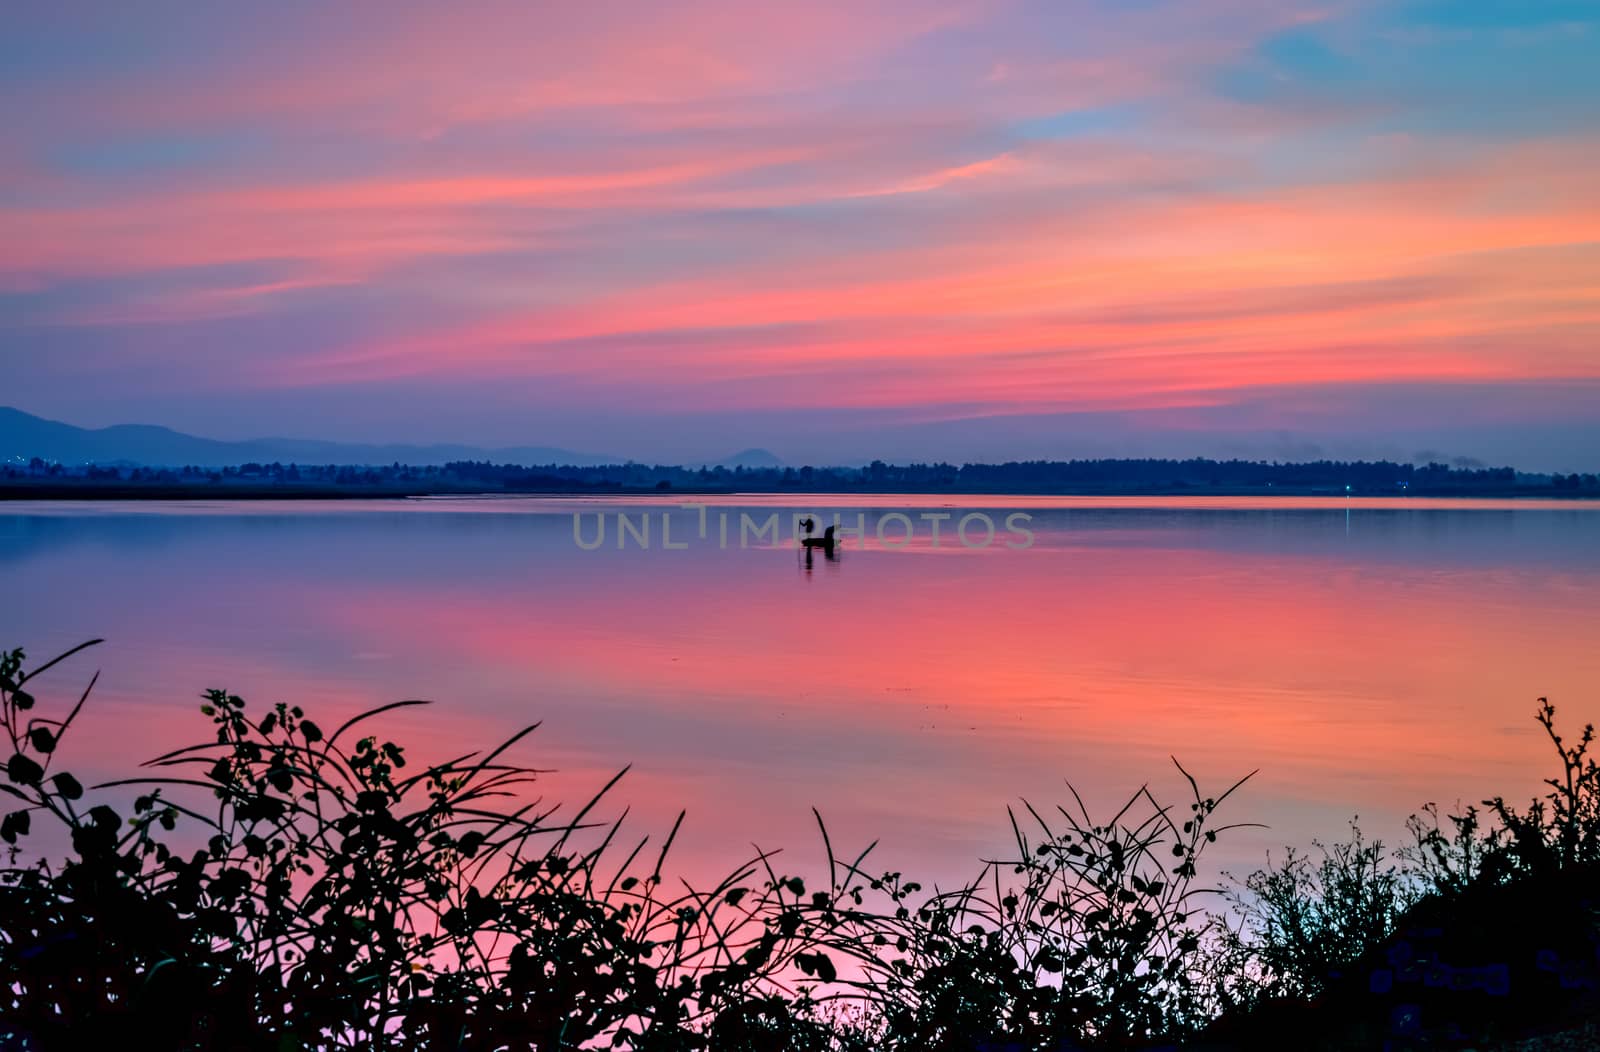 Beautiful evening sky over a lake in Hampi, Karnataka, India with nice dusk colors in the sky and lake.